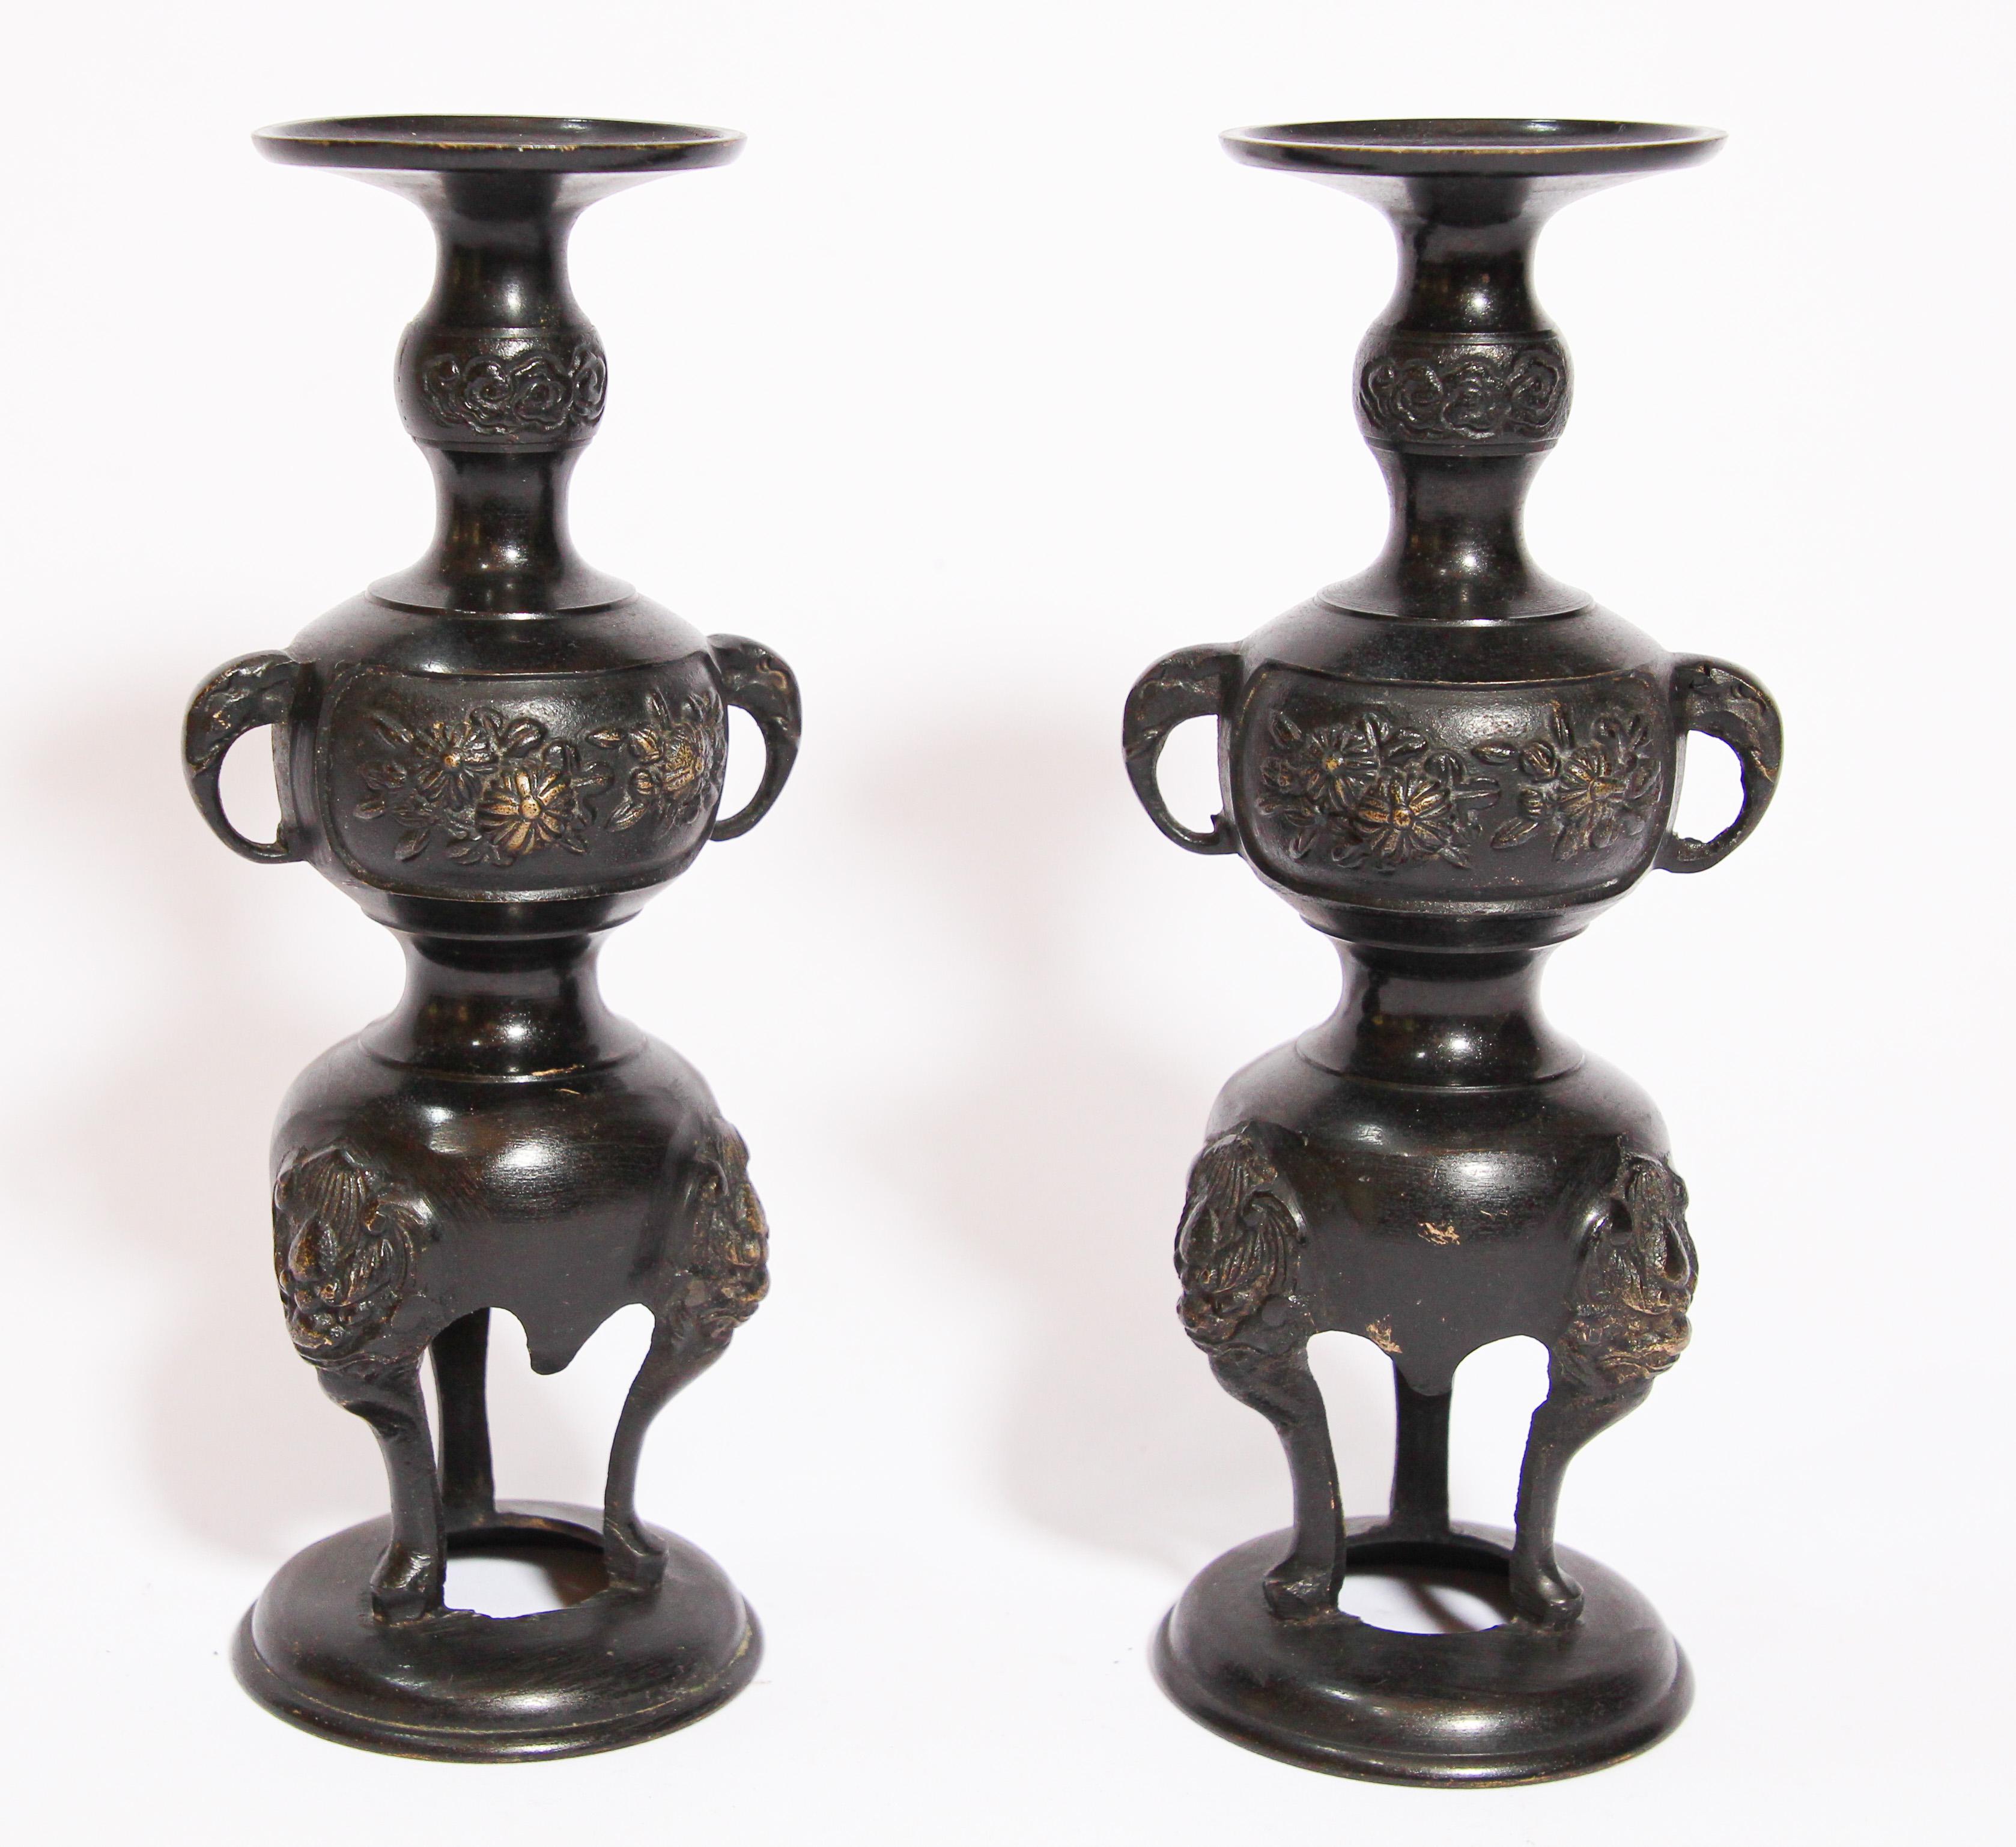 Pair of black cast bronze Japanese candleholders censer.
Oriental antique late 19th century Meiji period Japanese heavy black bronze candlesticks incense burner, censer decorated with Foo dogs, dragon, scenic cartouches depicting various birds and